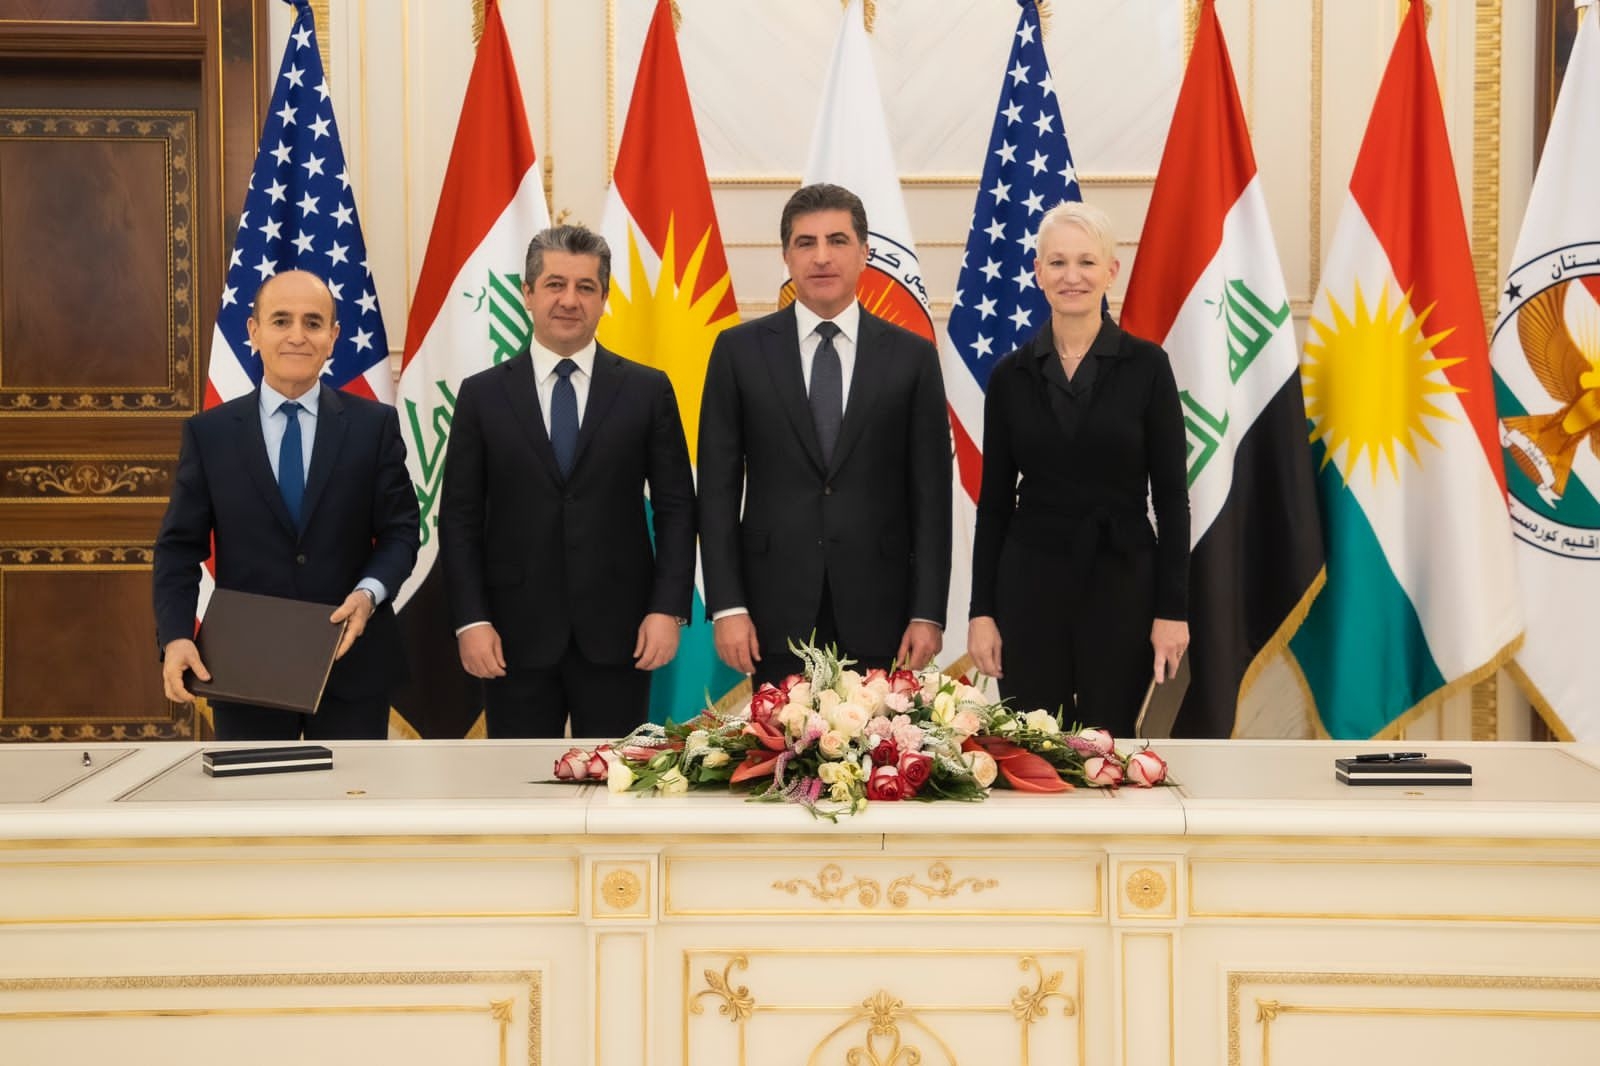 President Nechirvan Barzani oversees the signing of a Memorandum of Understanding between the Ministry of Peshmerga and the Pentagon